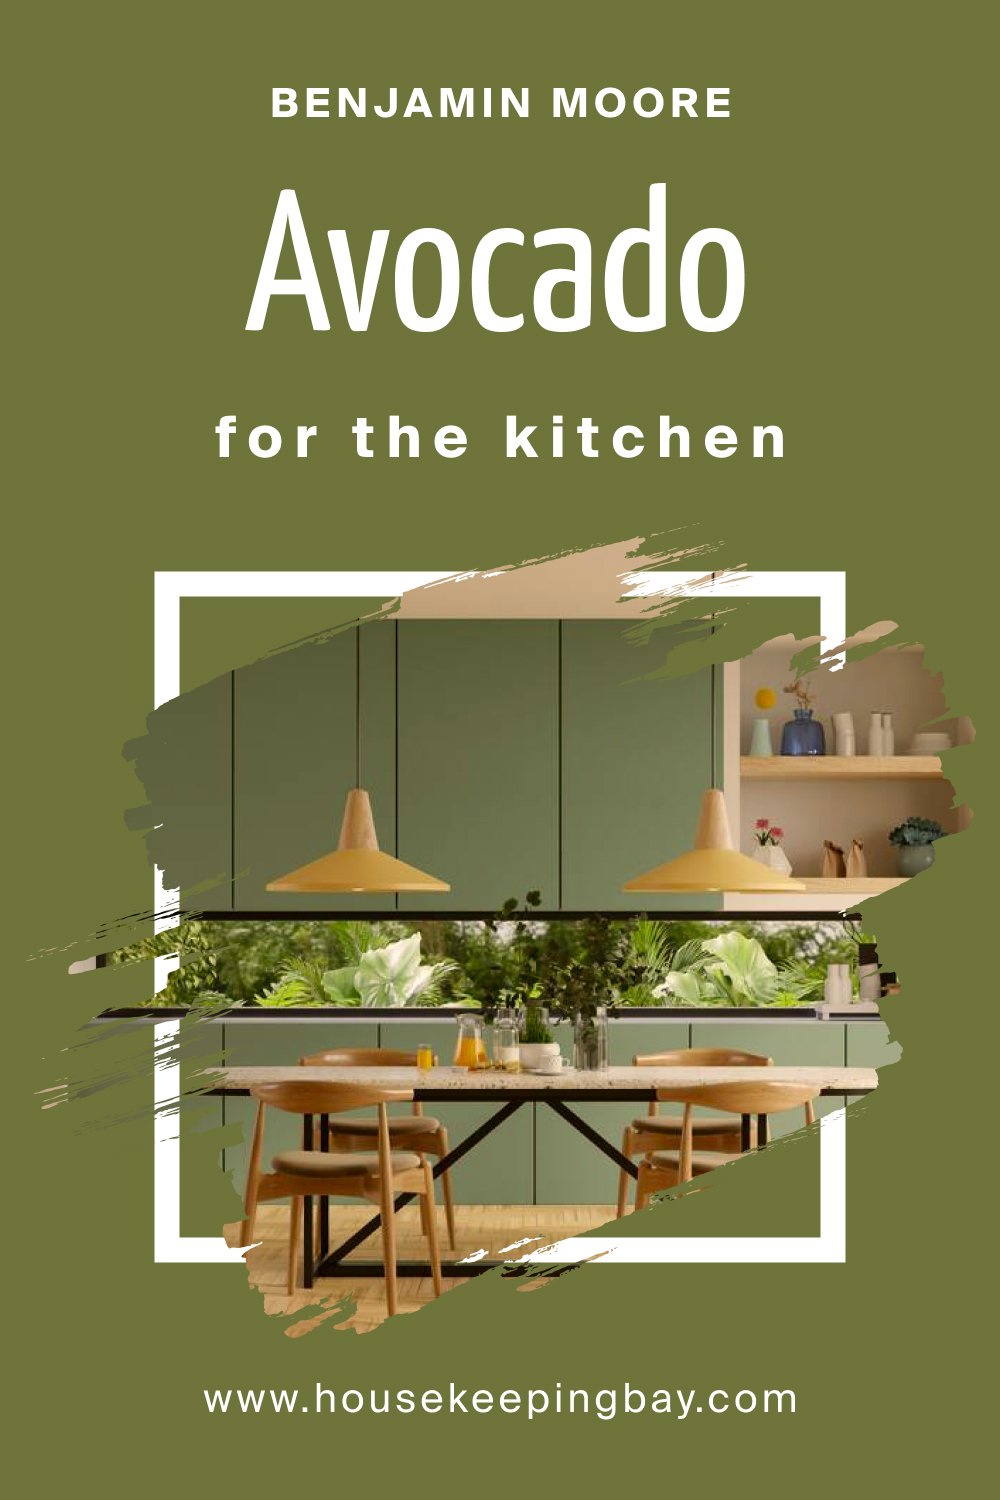 How to Use BM Avocado 2145-10 in the Kitchen?